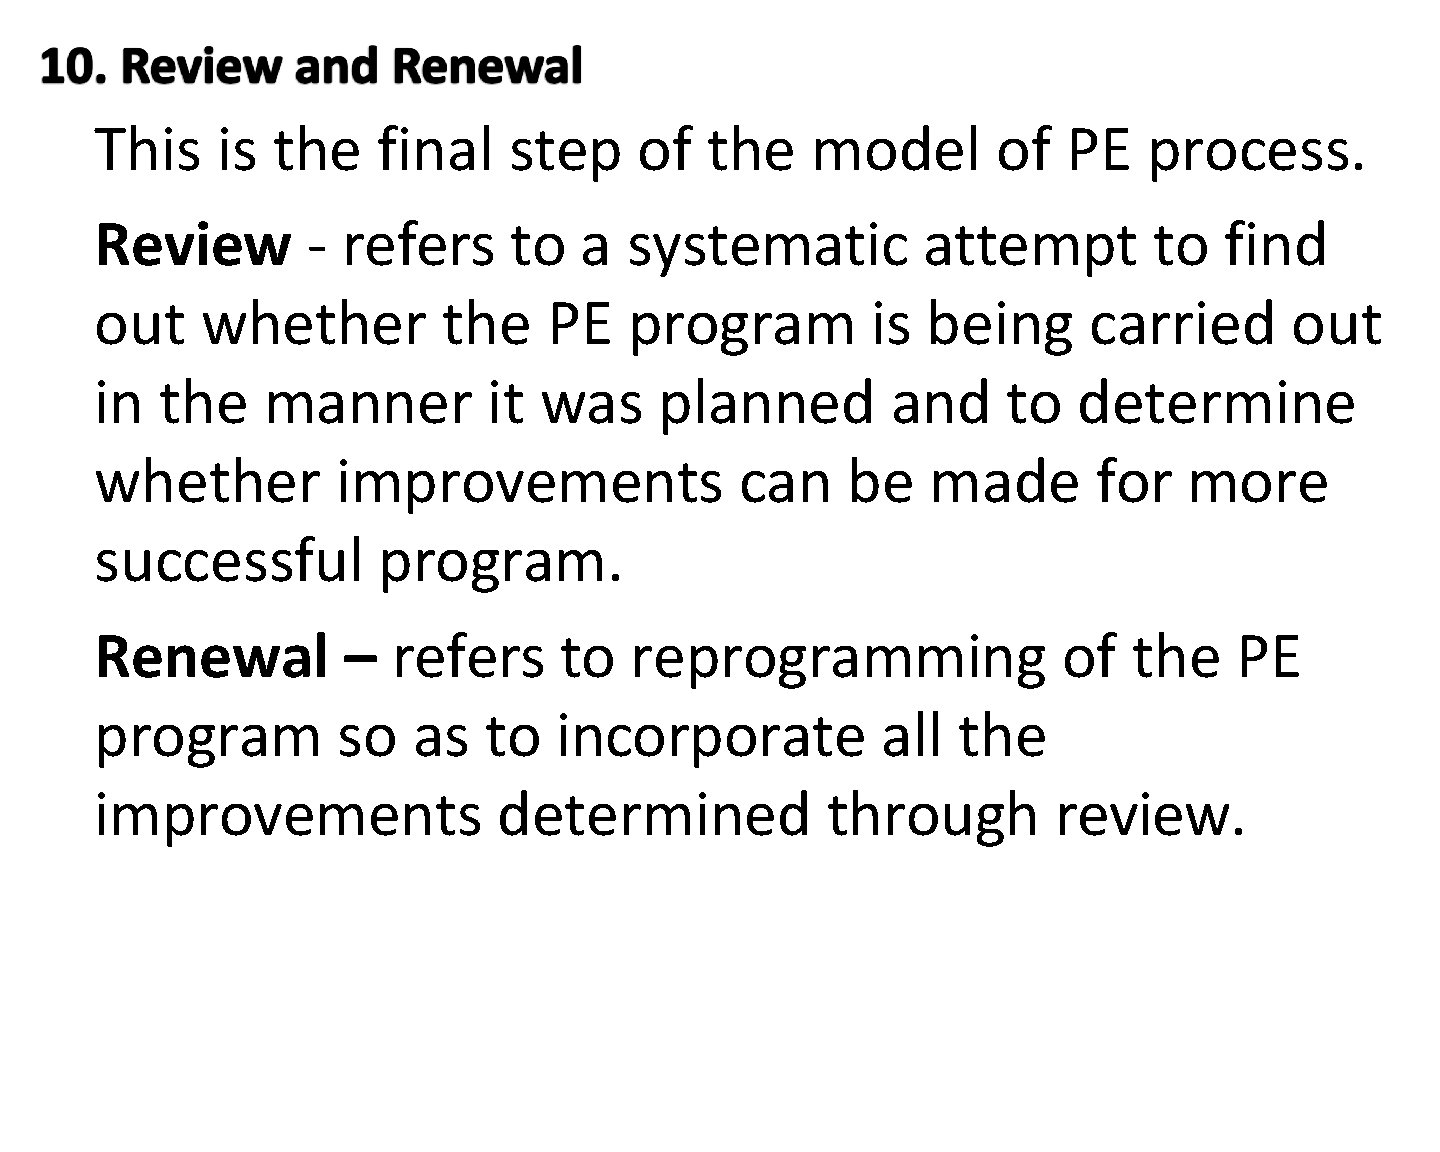 This is the final step of the model of PE process. Review - refers